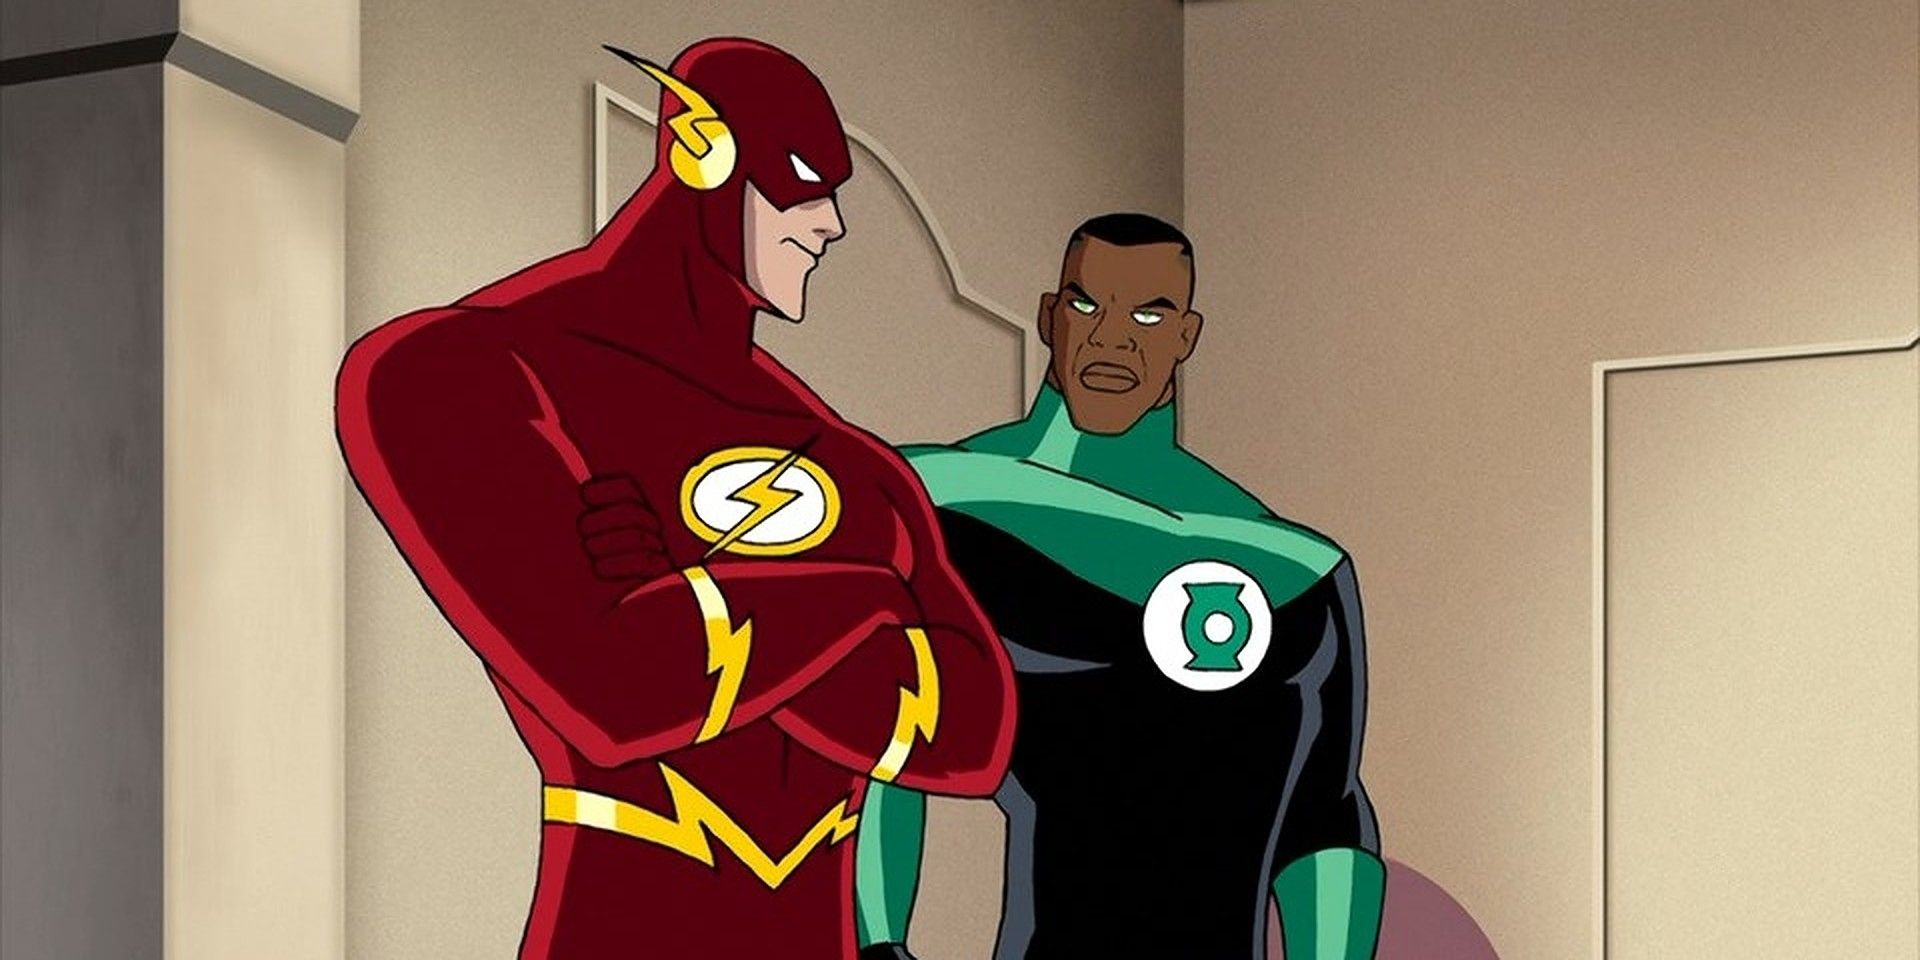 The Flash and Green Lantern looking angry at each other